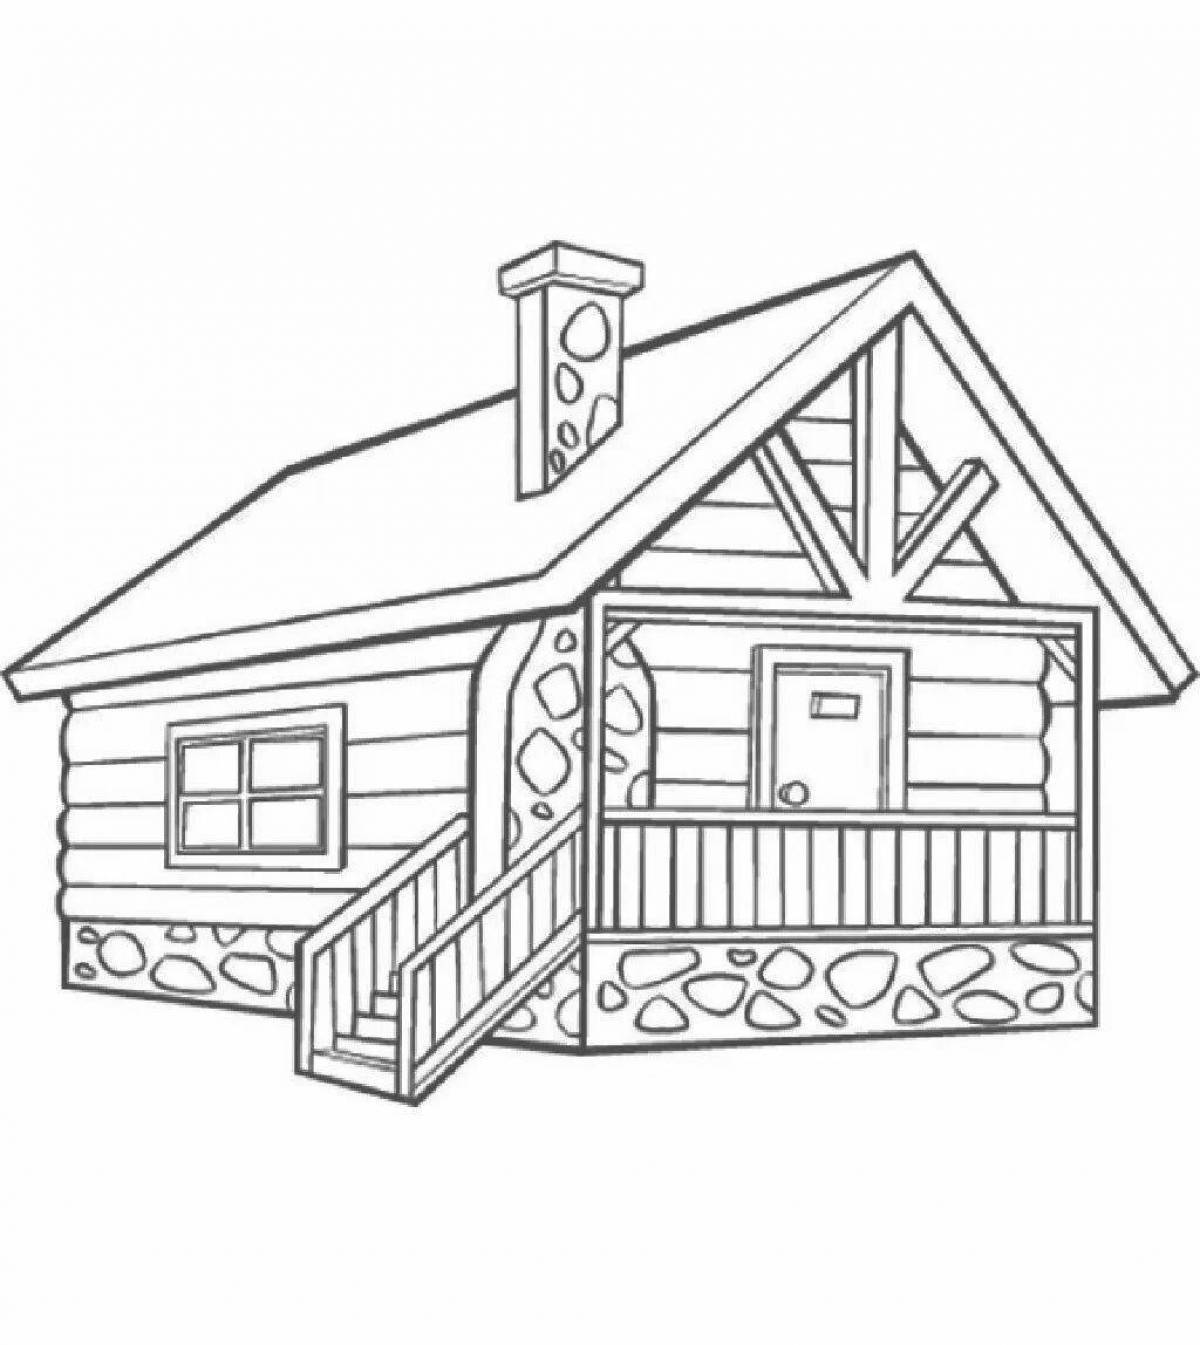 Colouring sunny wooden hut